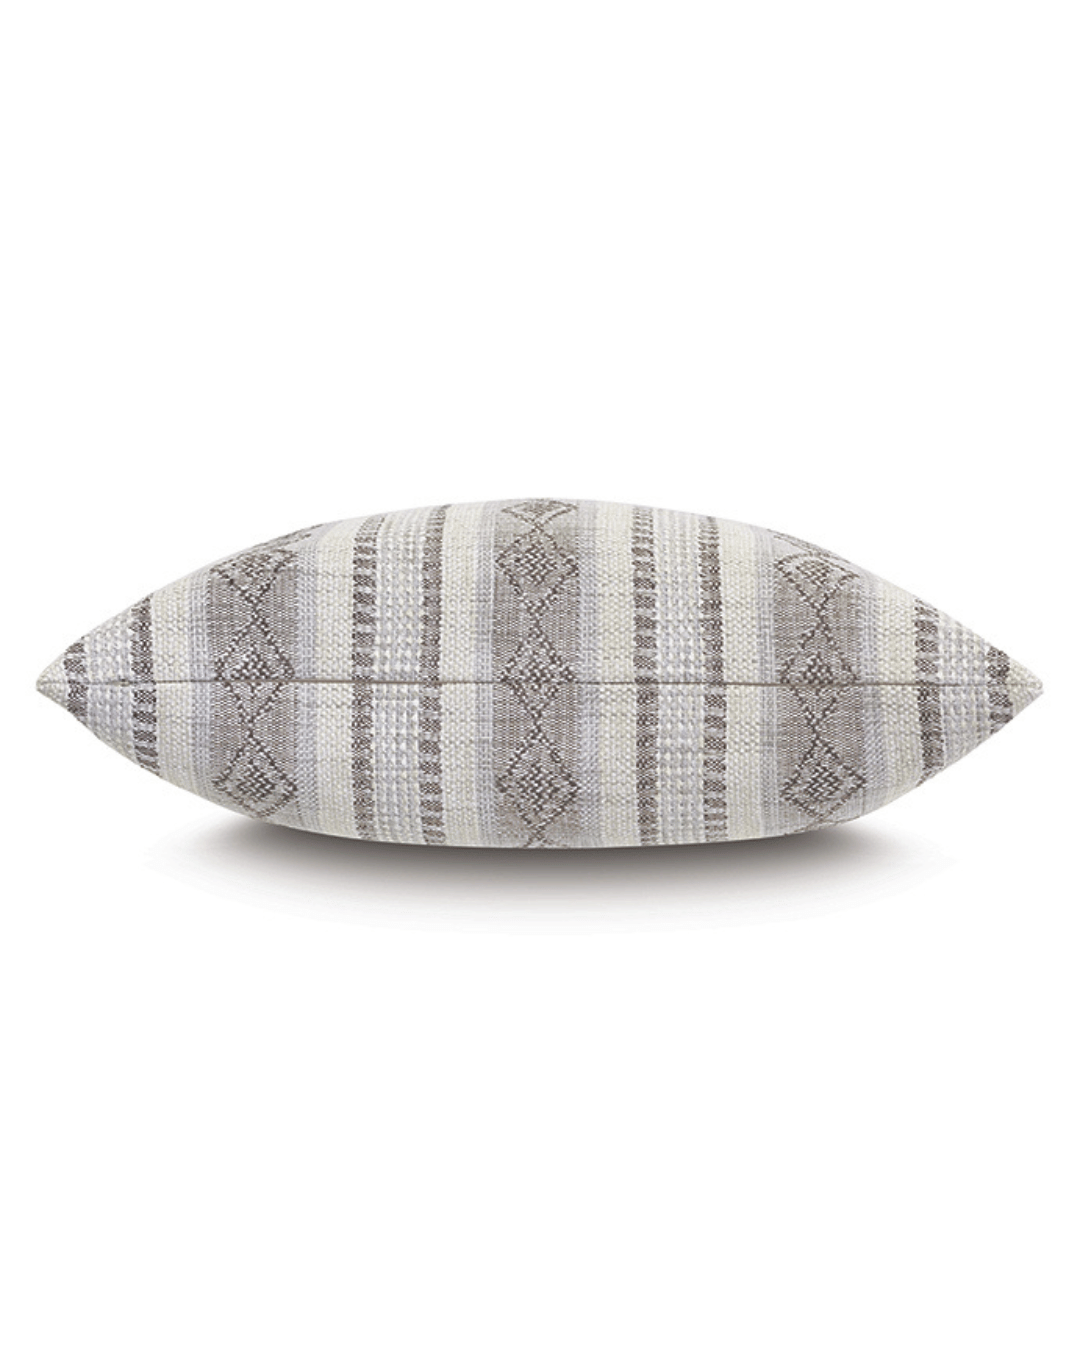 A rectangular, woven pillow with a neutral color palette featuring shades of white, beige, and grey. The DIAMOND EURO SHAM 27x27 by Eastern Accents displays a diamond and stripe pattern for added texture and design, complemented by a down feather insert for extra comfort.